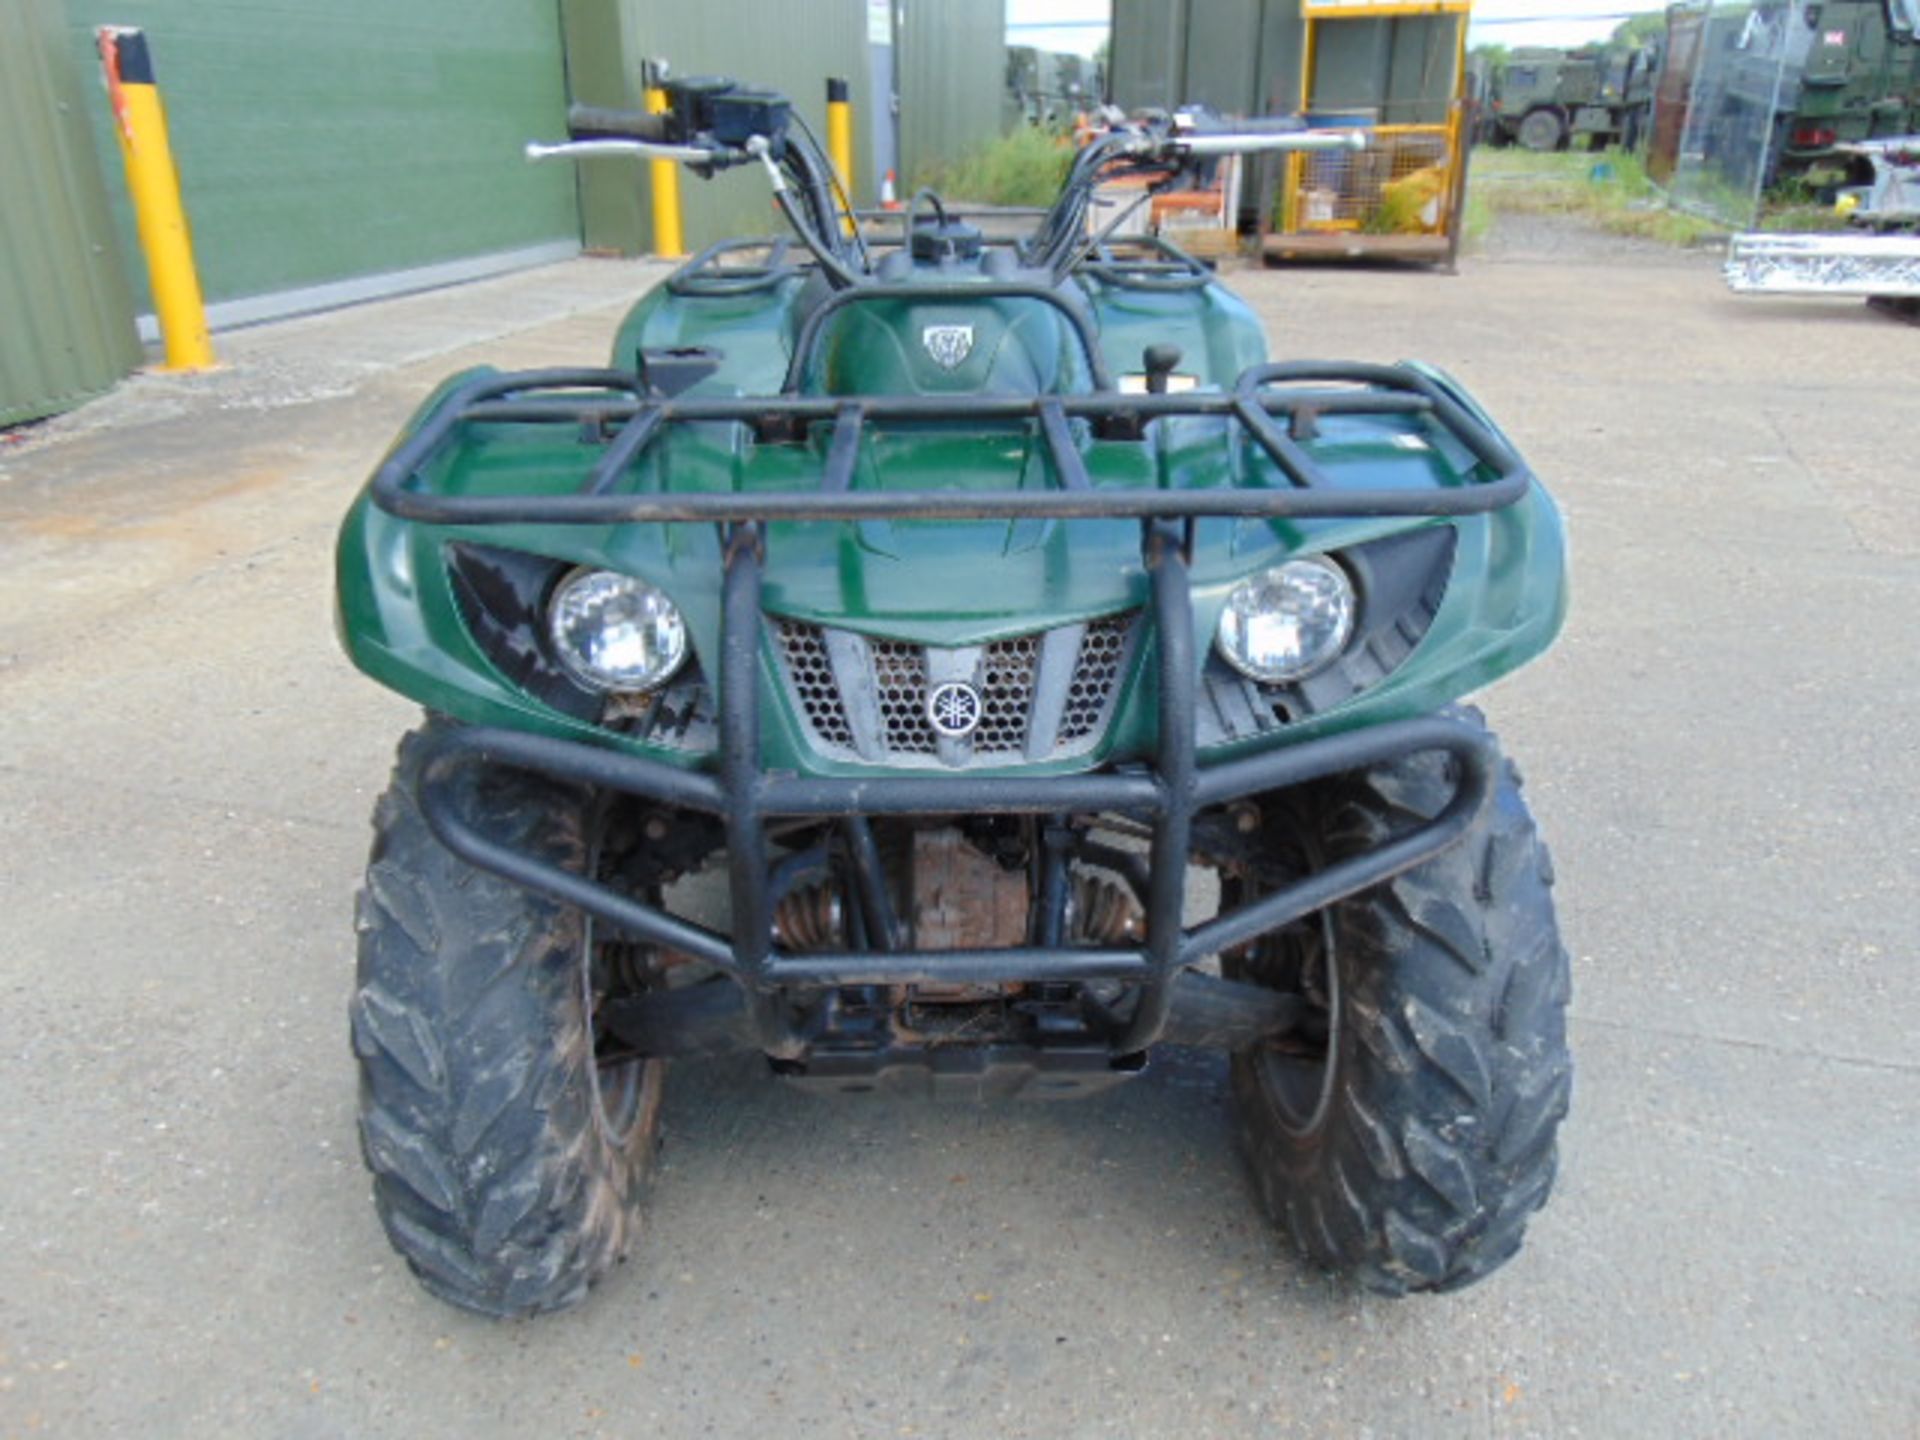 2007 Yamaha Grizzly 350 Ultramatic 4 x 4 ATV Quad Bike ONLY 1,572KM! - Image 2 of 24